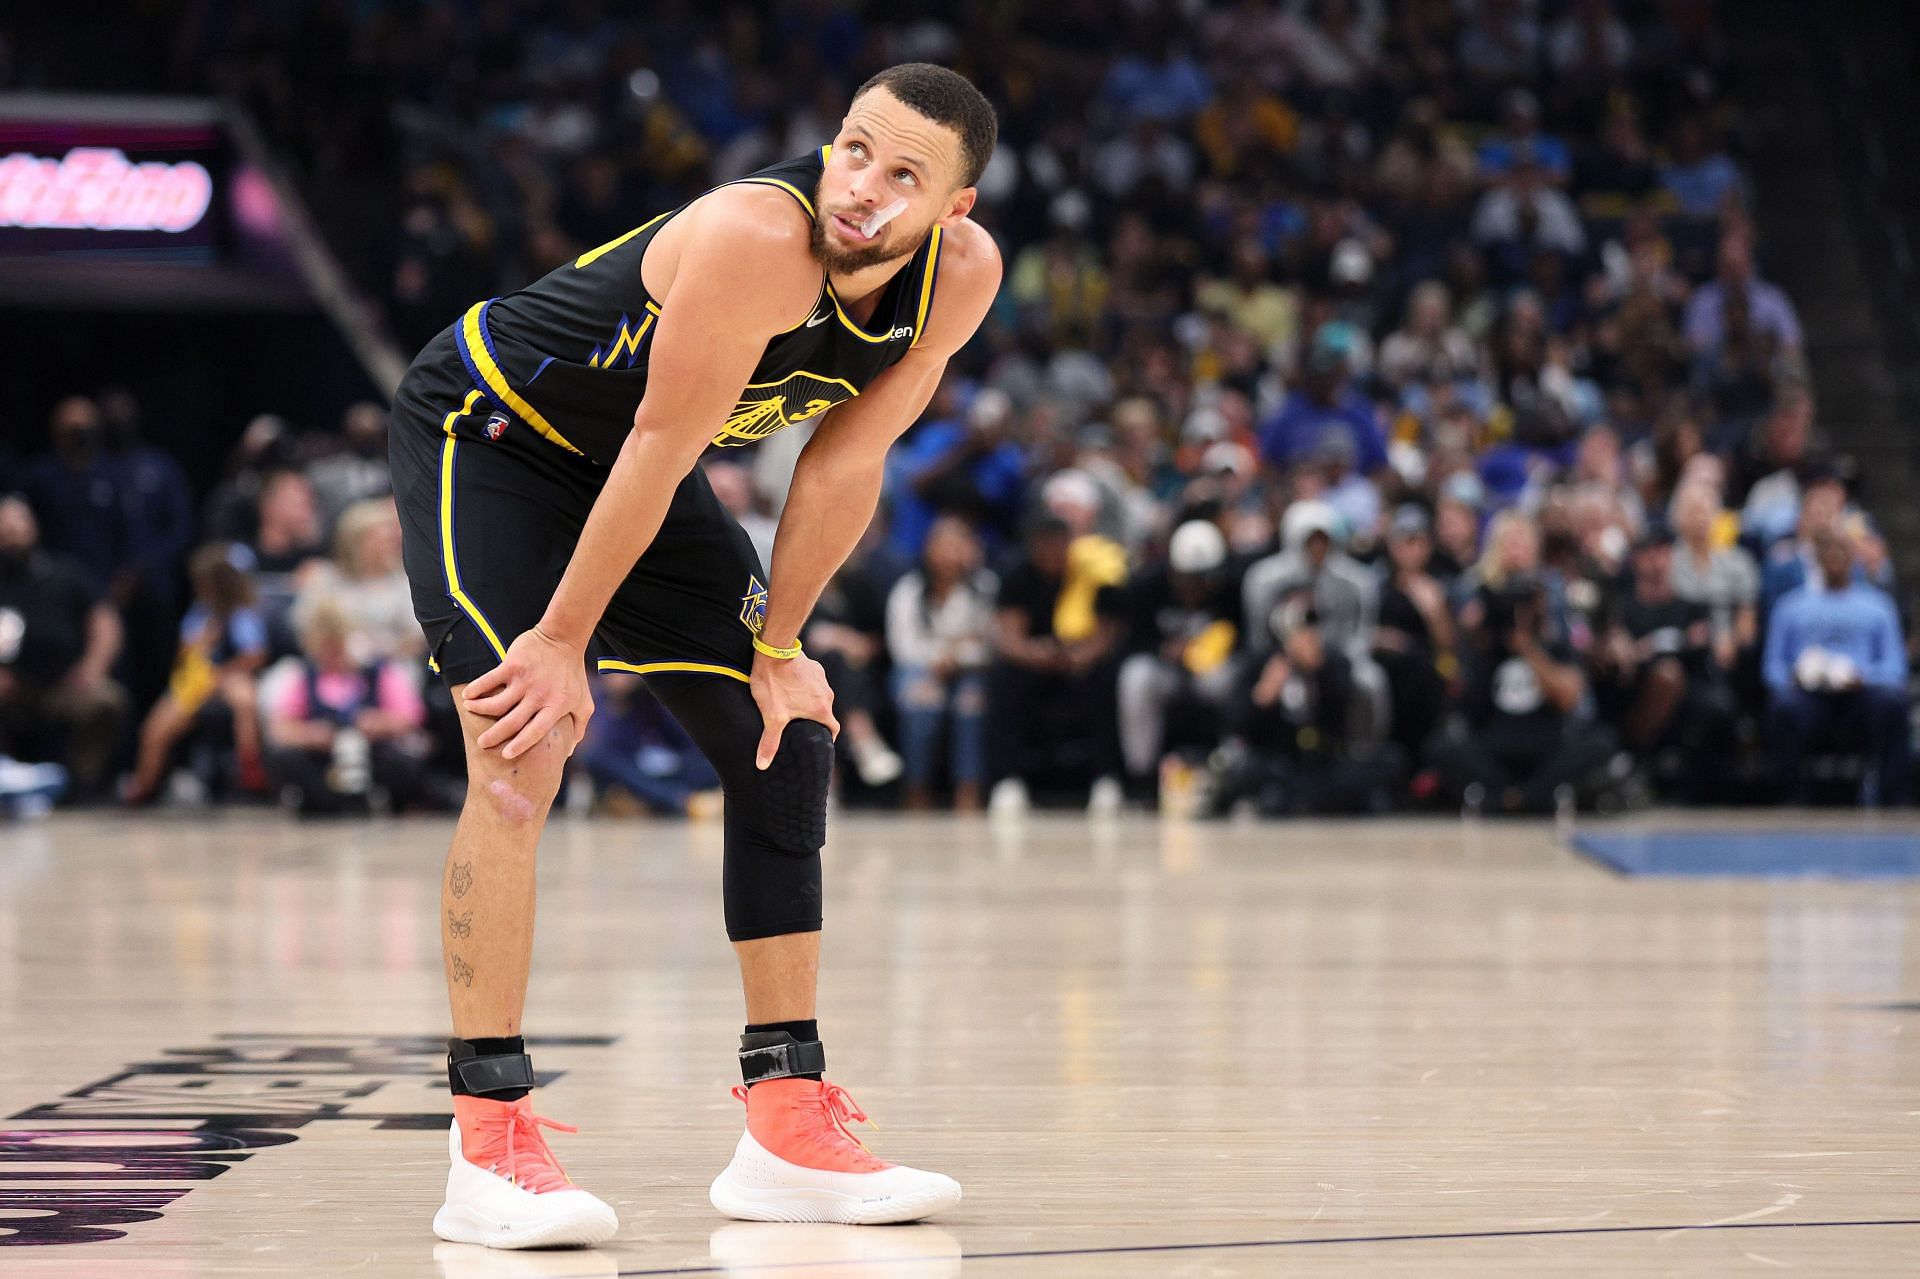 Steph Curry of the Golden State Warriors in the 2022 NBA Western Conference semifinals.